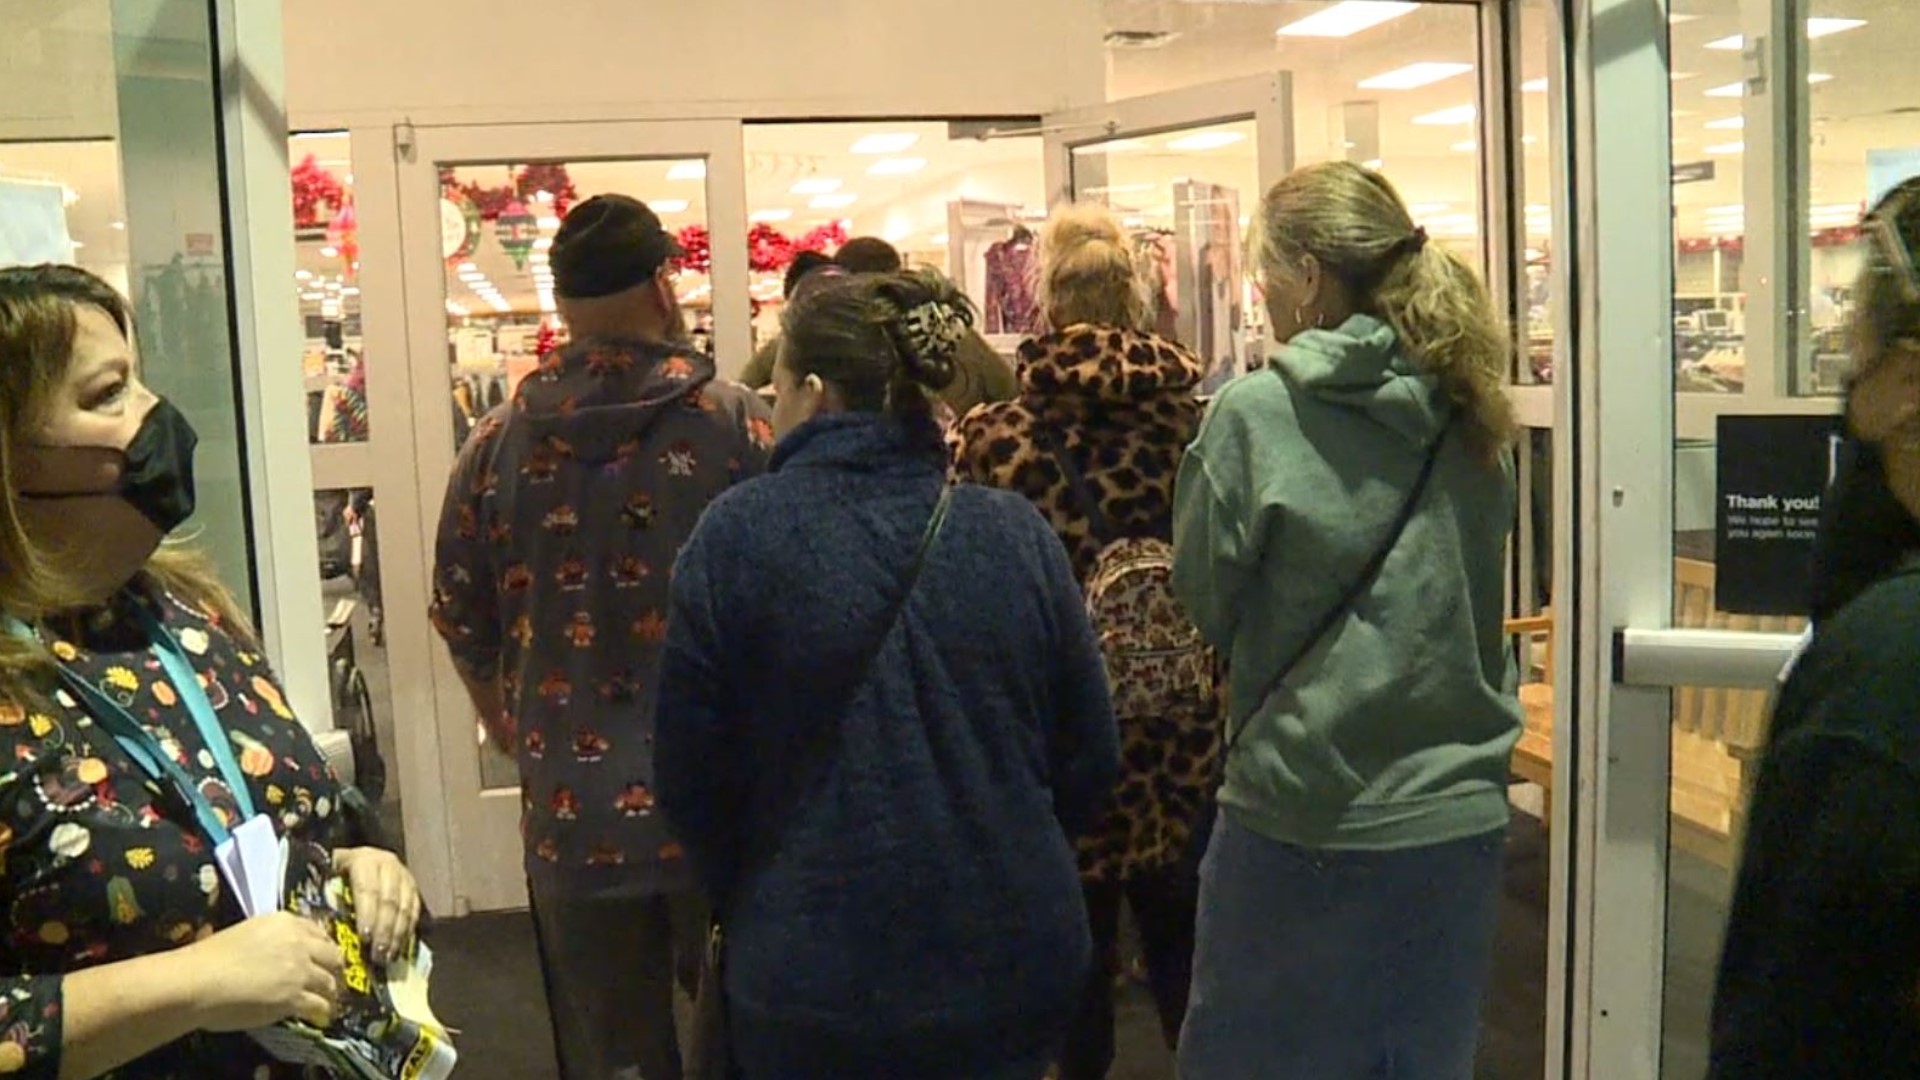 Despite the ease of online shopping or worries over COVID-19, many shoppers lined up at big box stores on Black Friday morning for deals and discounts in Luzerne Co.